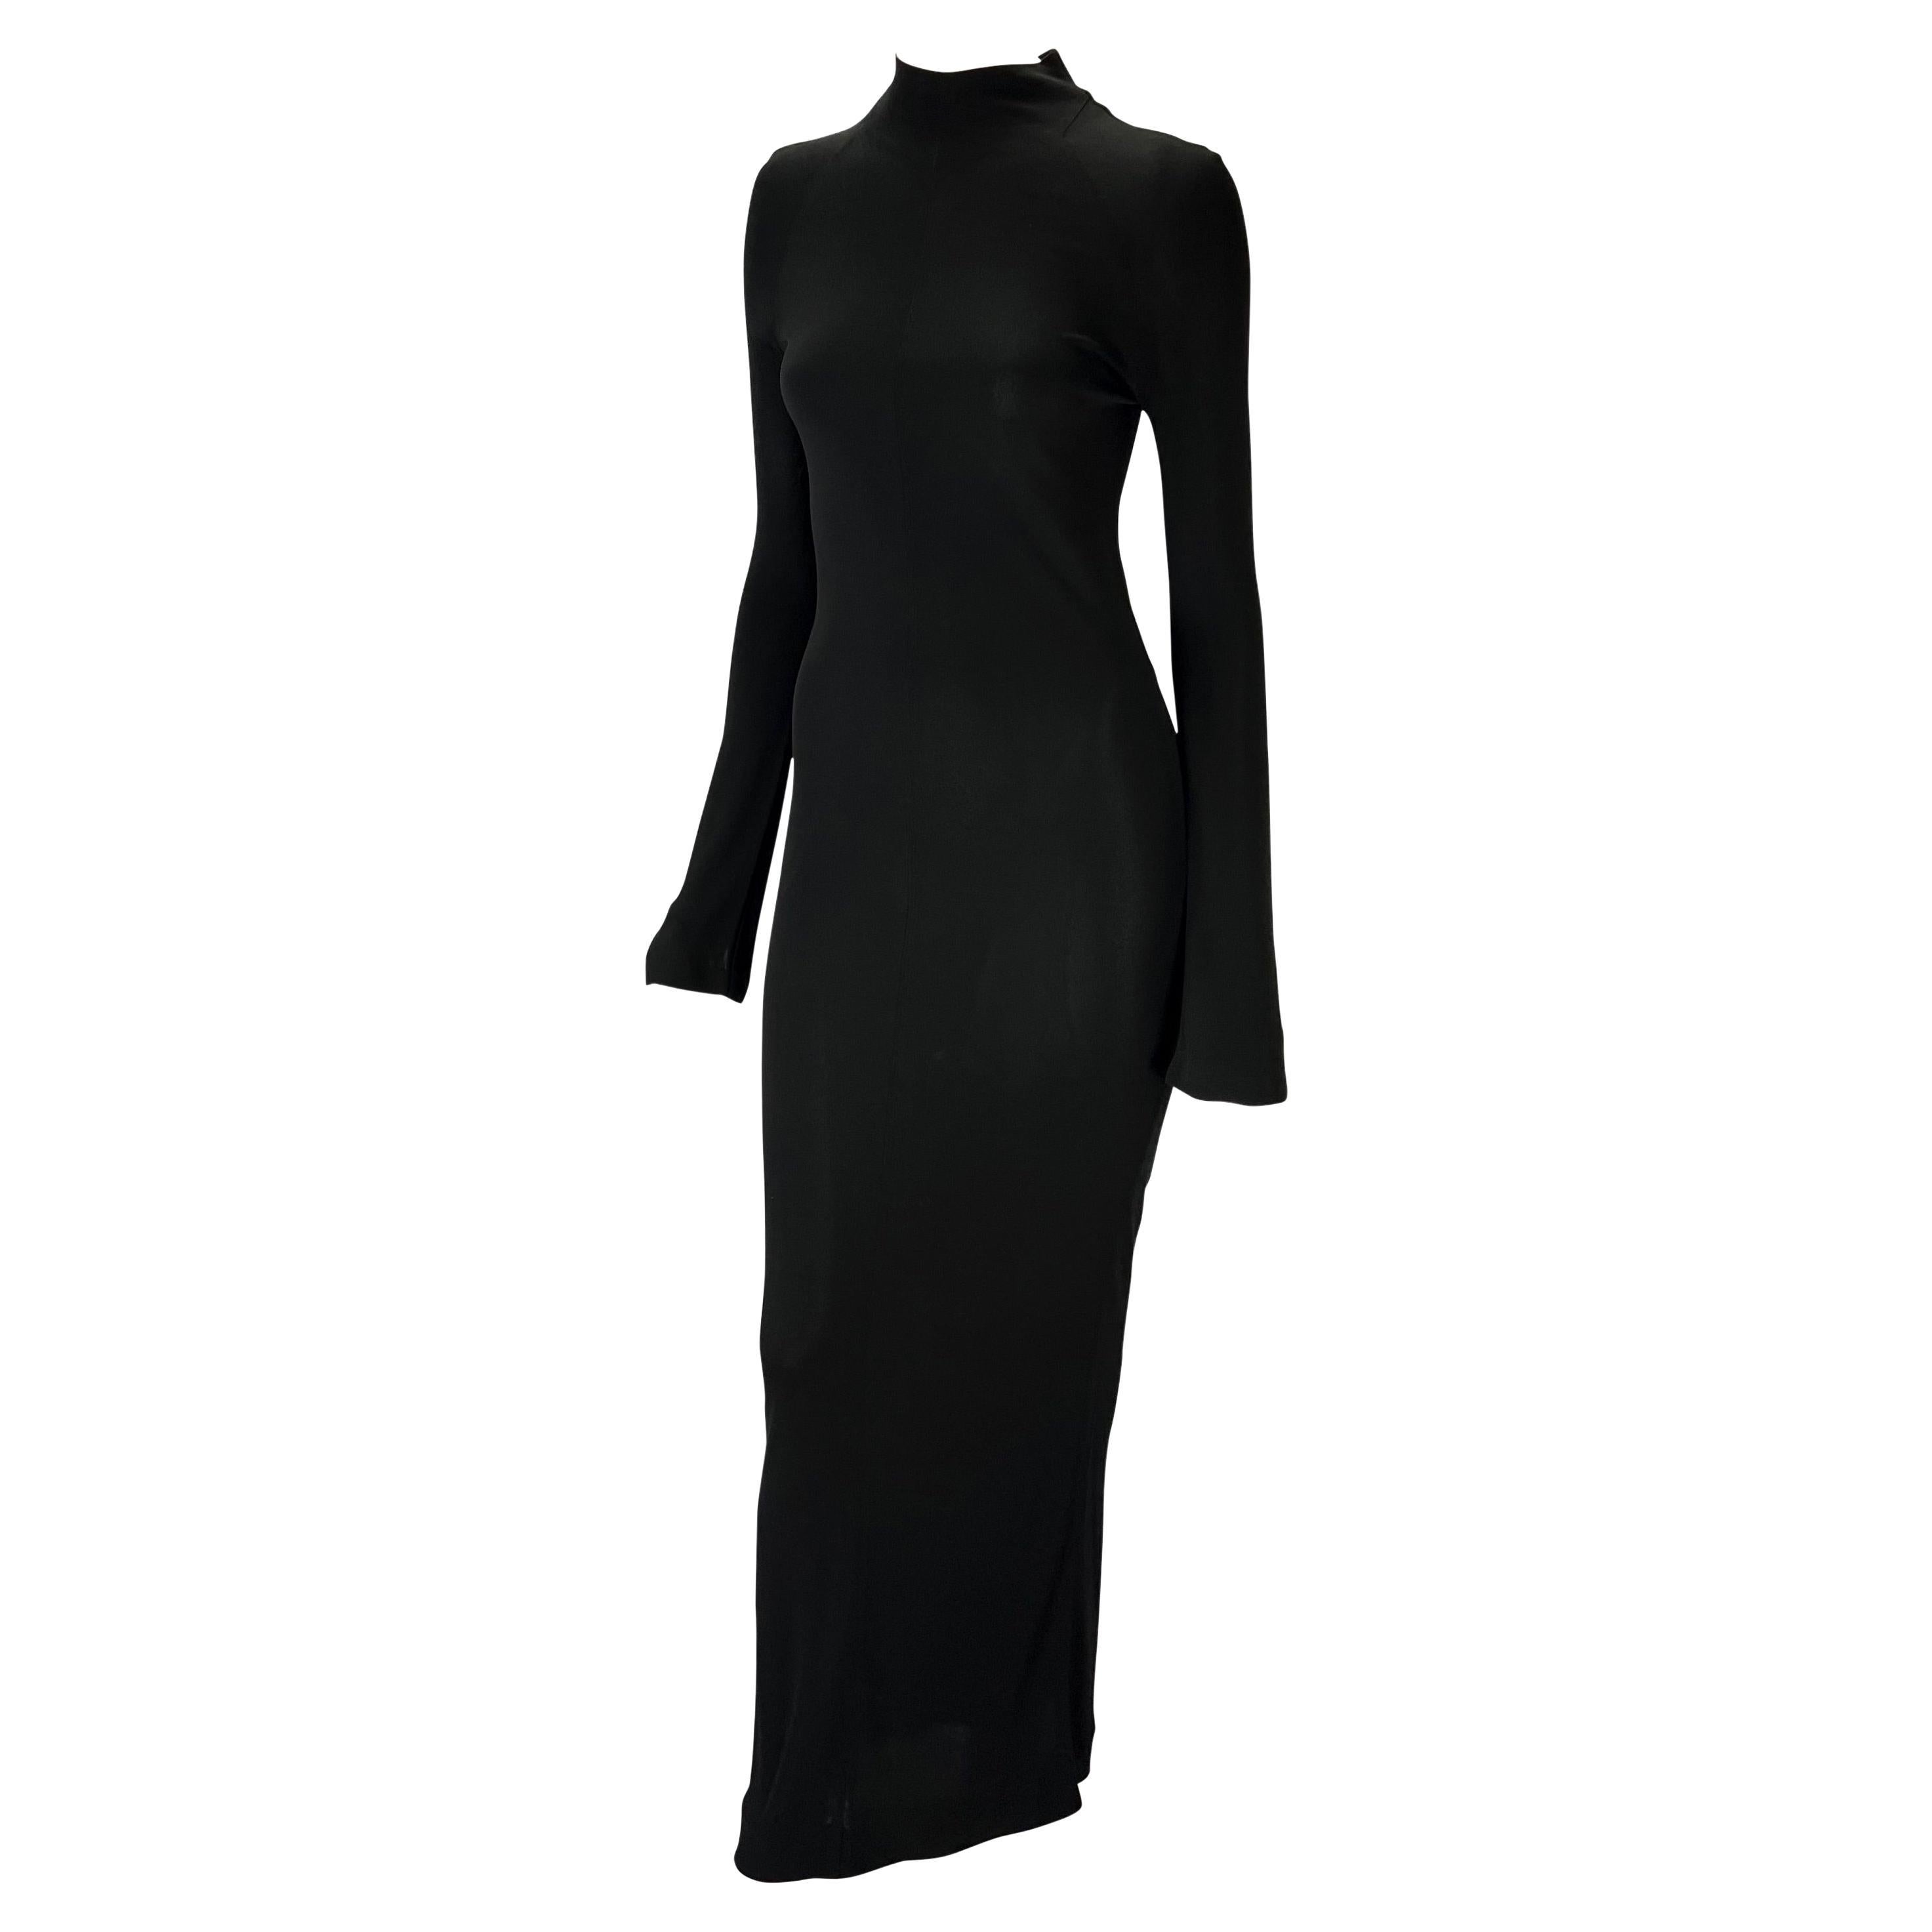 S/S 1998 Gucci by Tom Ford Black Stretch Viscose Long Sleeve Gown In Excellent Condition For Sale In West Hollywood, CA